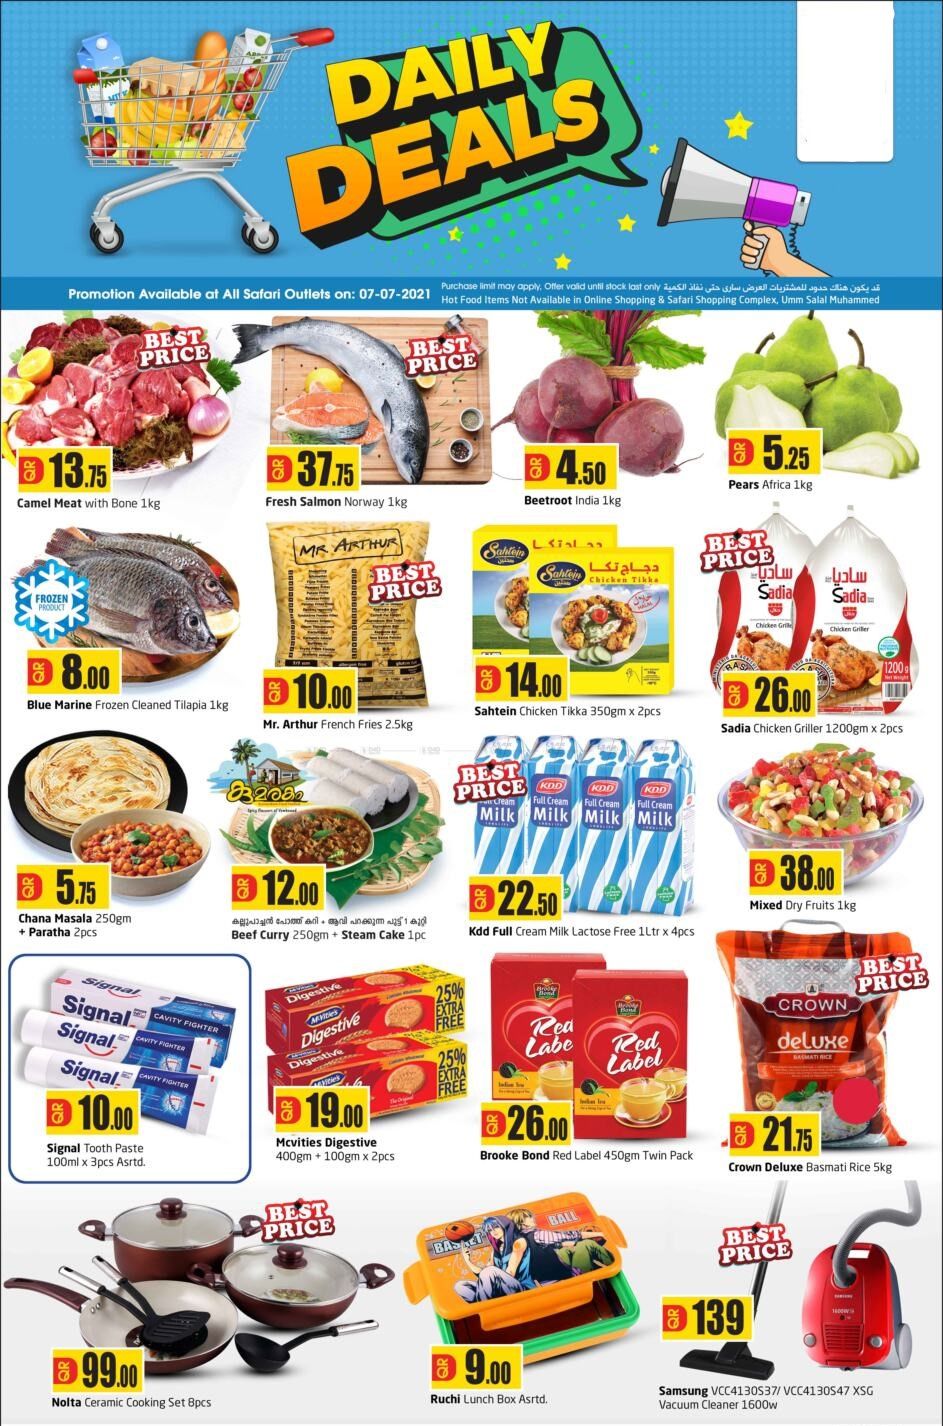 Meat & Seafood Promotions offer - in Doha #90 - 1  image 